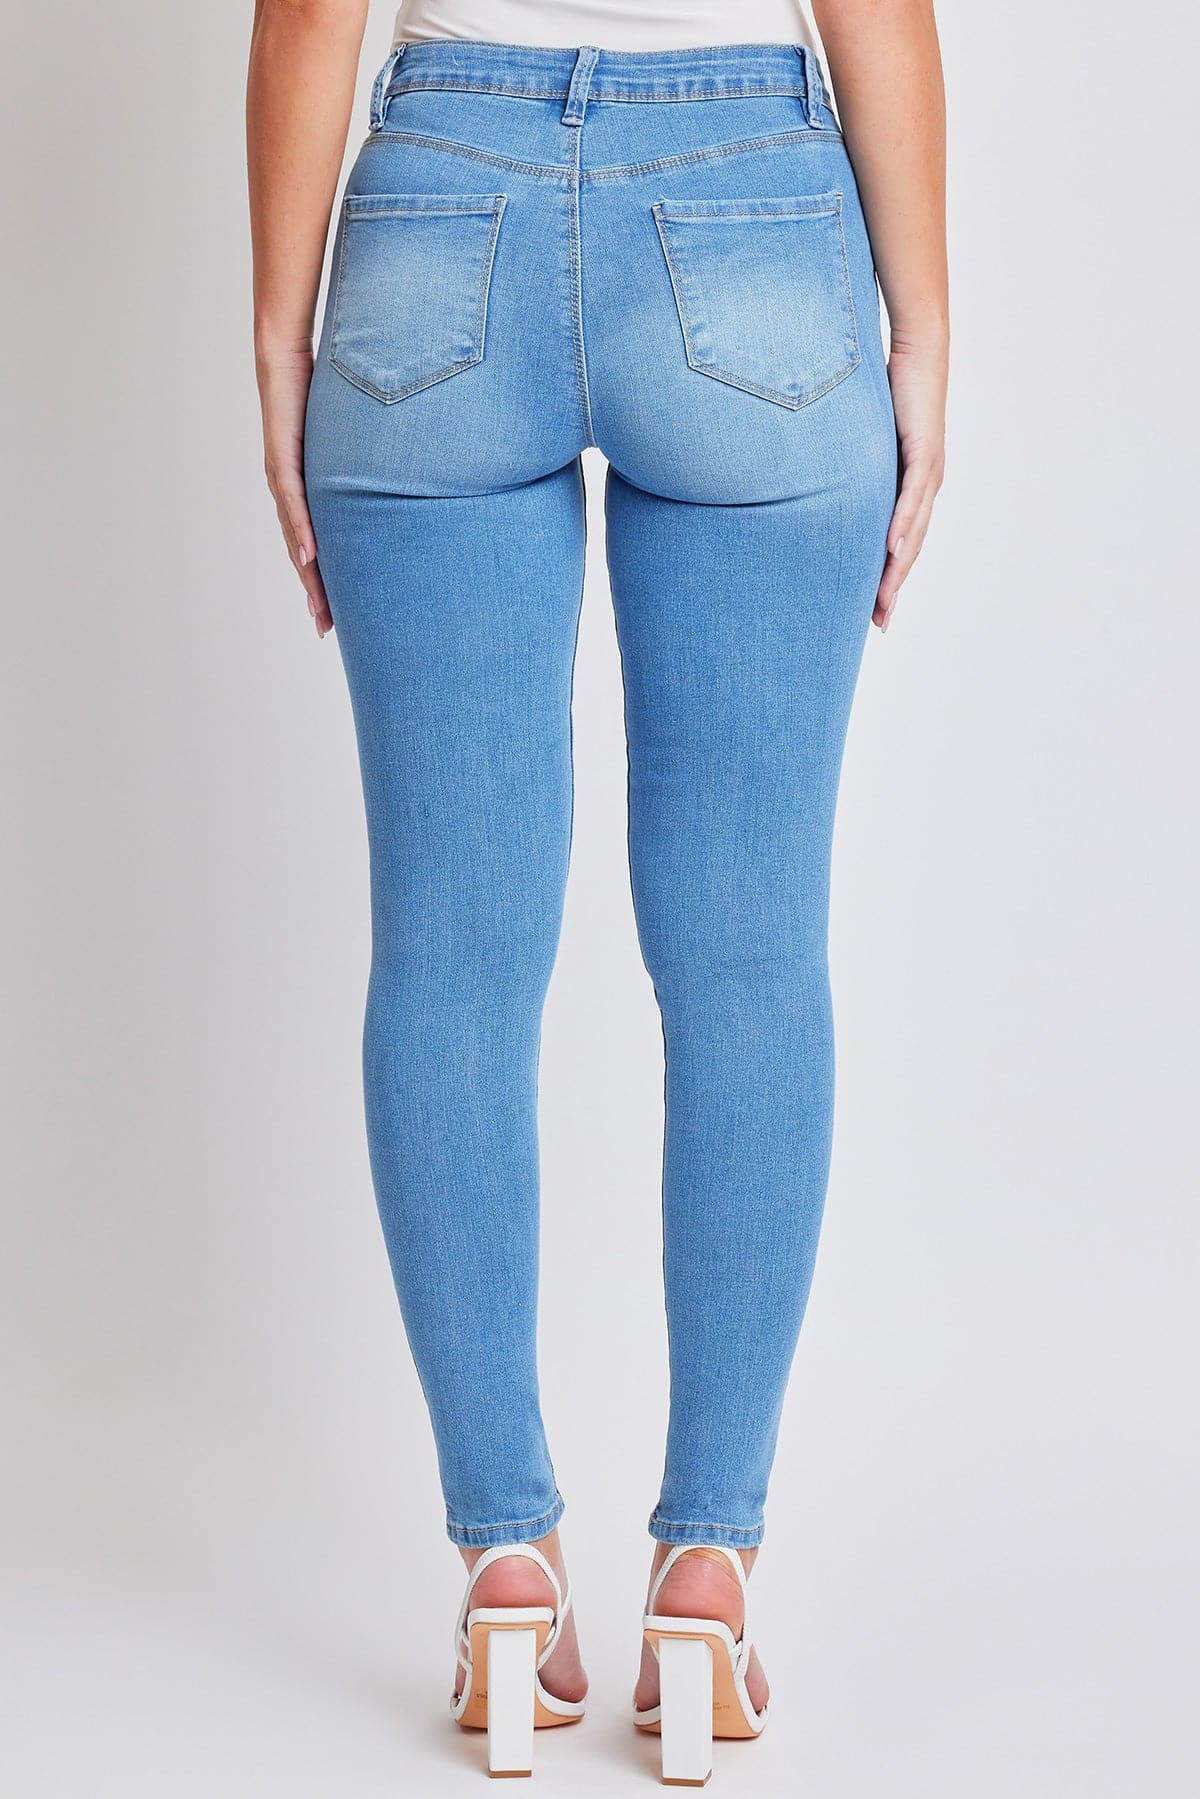 Women's Essential Sustainable Skinny Jeans